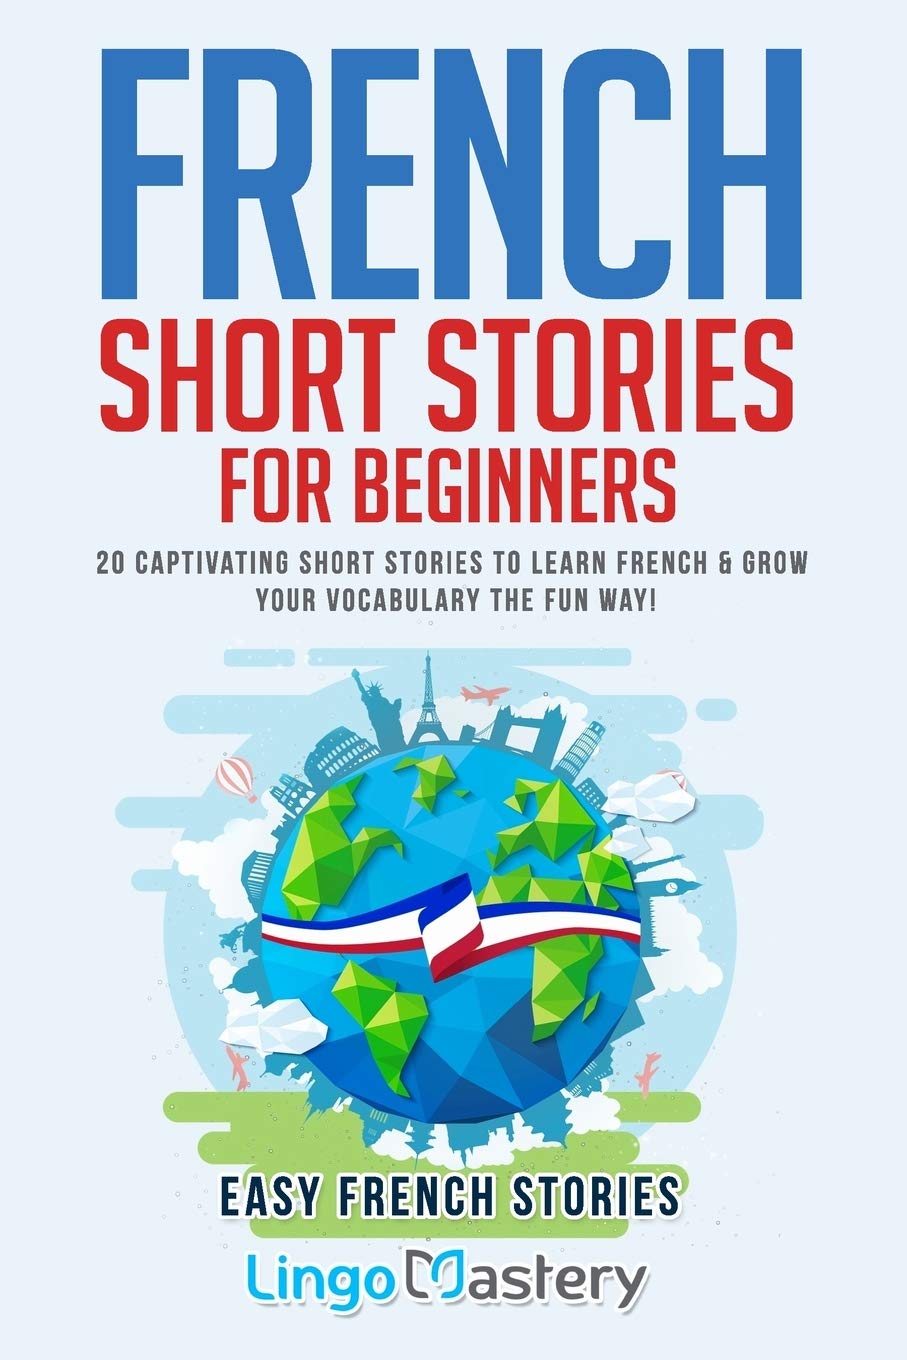 French Short Stories for Beginners: 20 Captivating Short Stories to Learn French & Grow Your Vocabulary the Fun Way! (Easy French Stories) (French Edition)